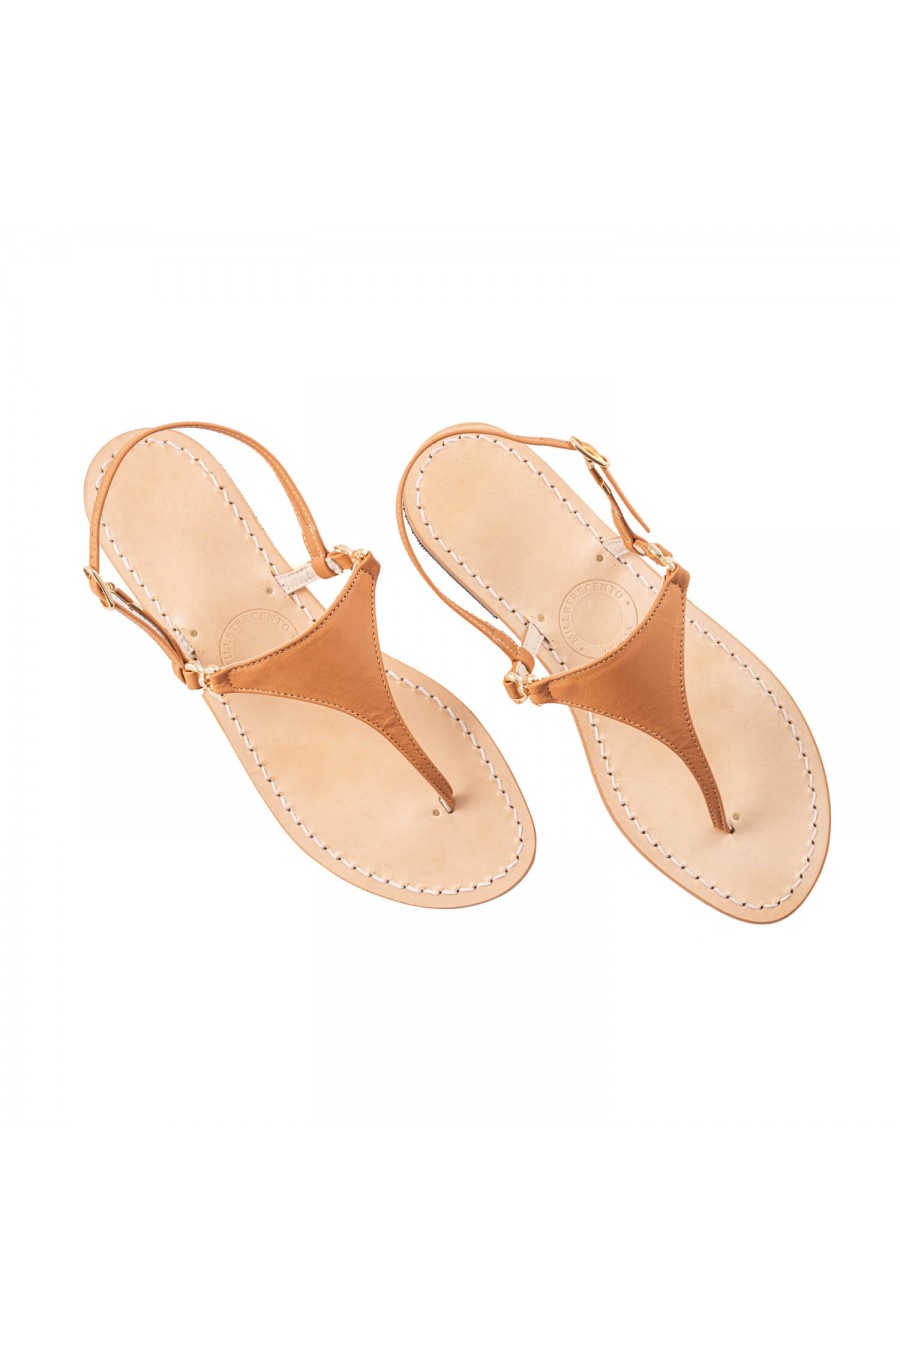 Capri Cuoio Handcrafted flat leather sandals